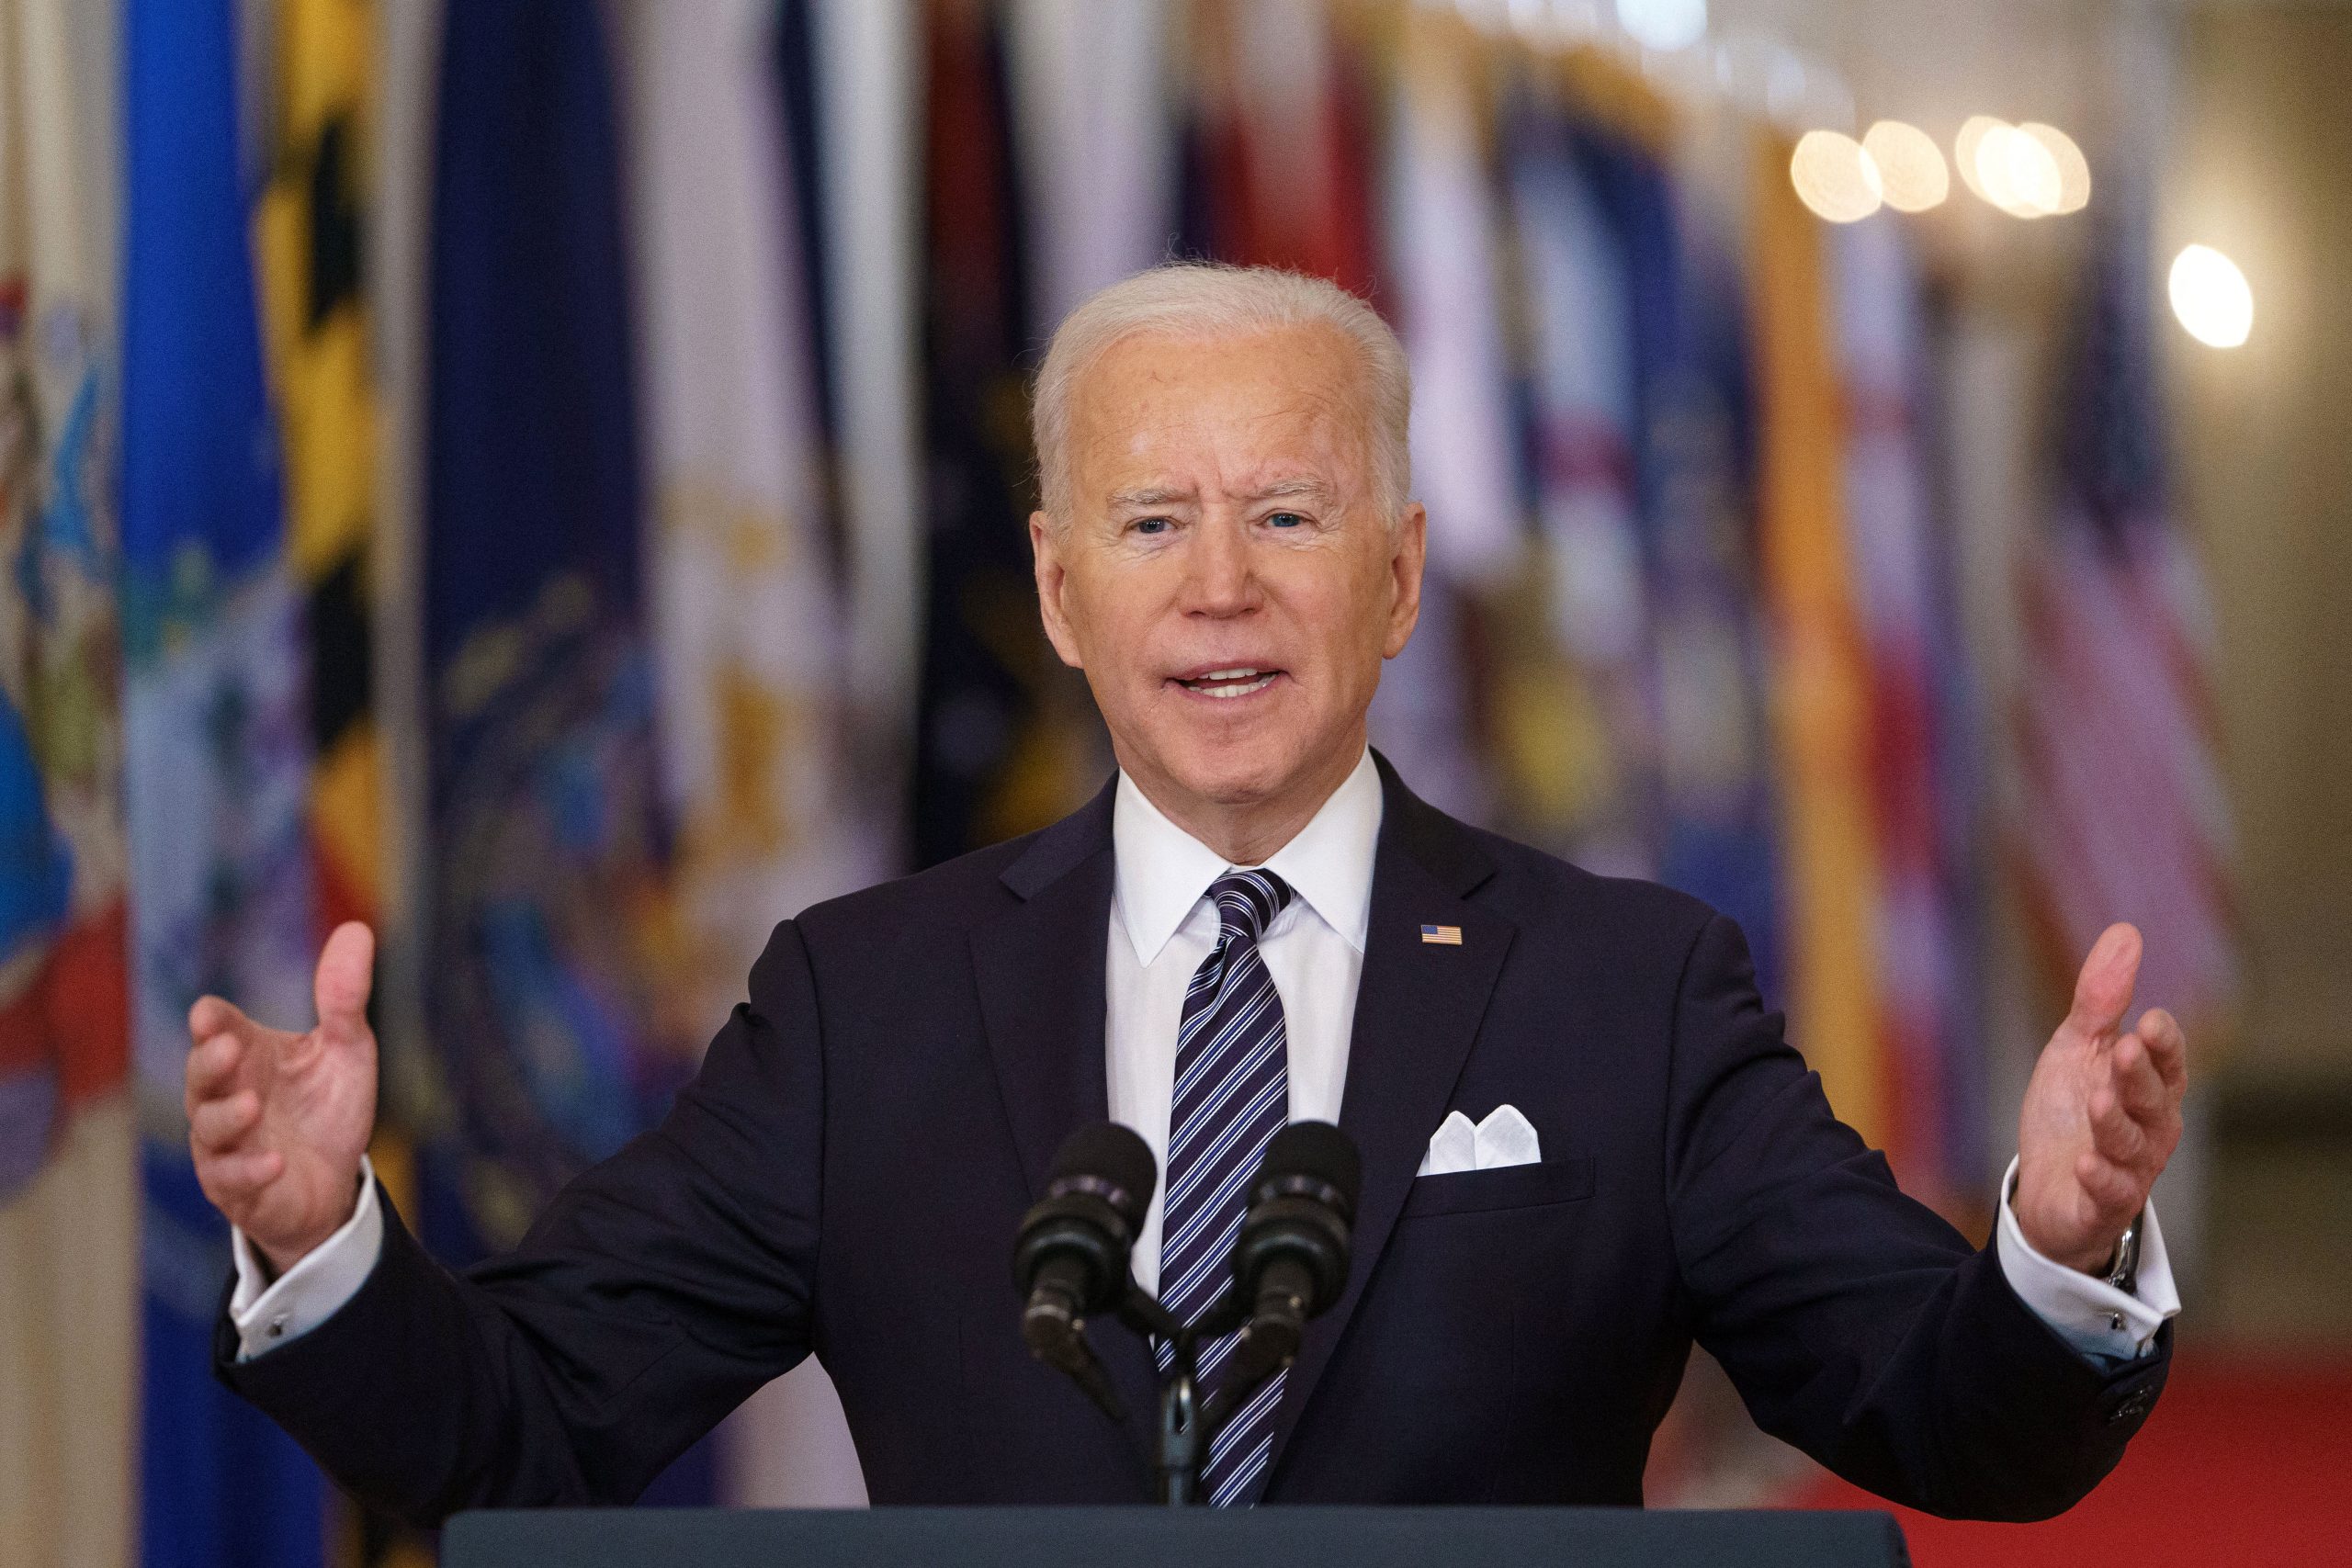 In Joe Biden’s big climate plans, a promise on China and Russia